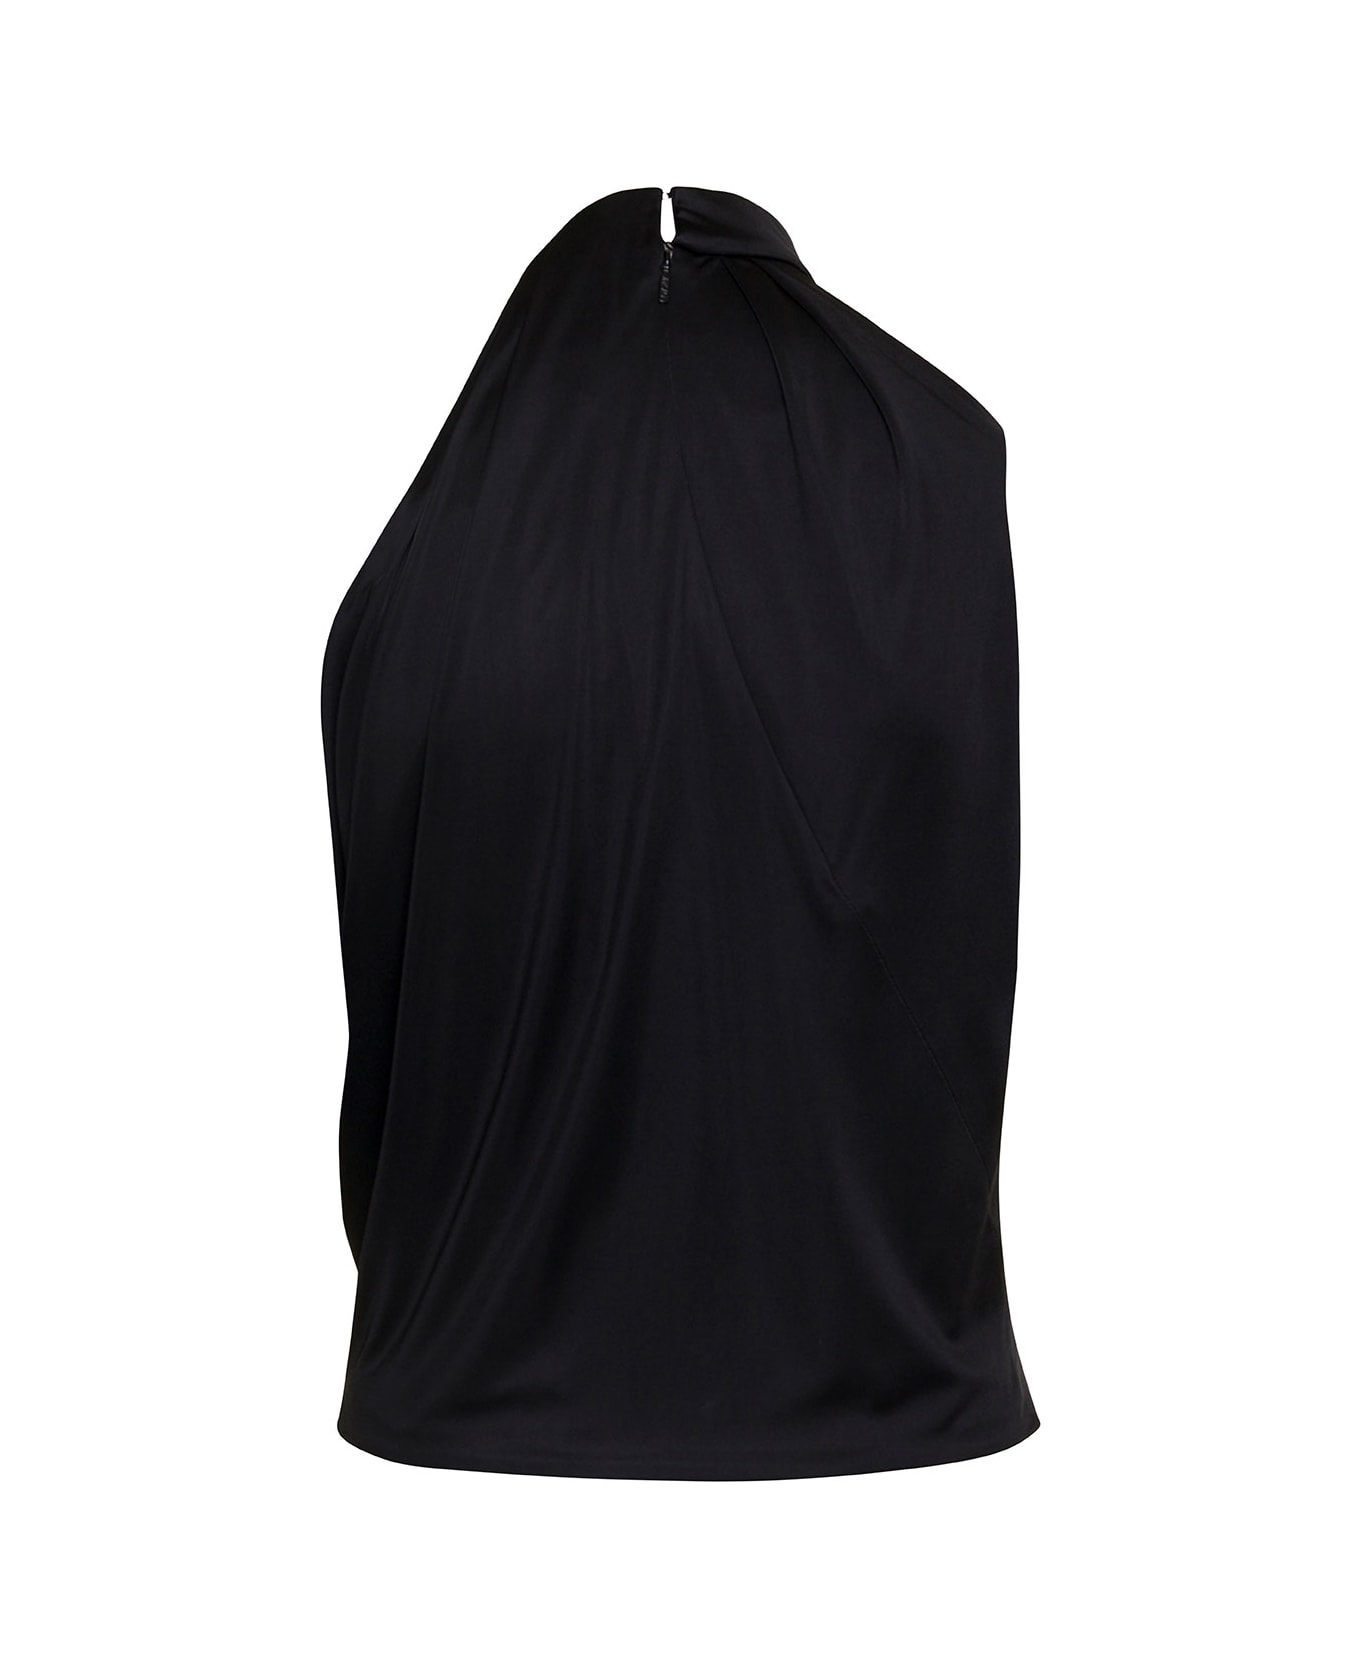 Versace Black Halterneck Top With Diagonal Cut-out In Viscose Woman - Black